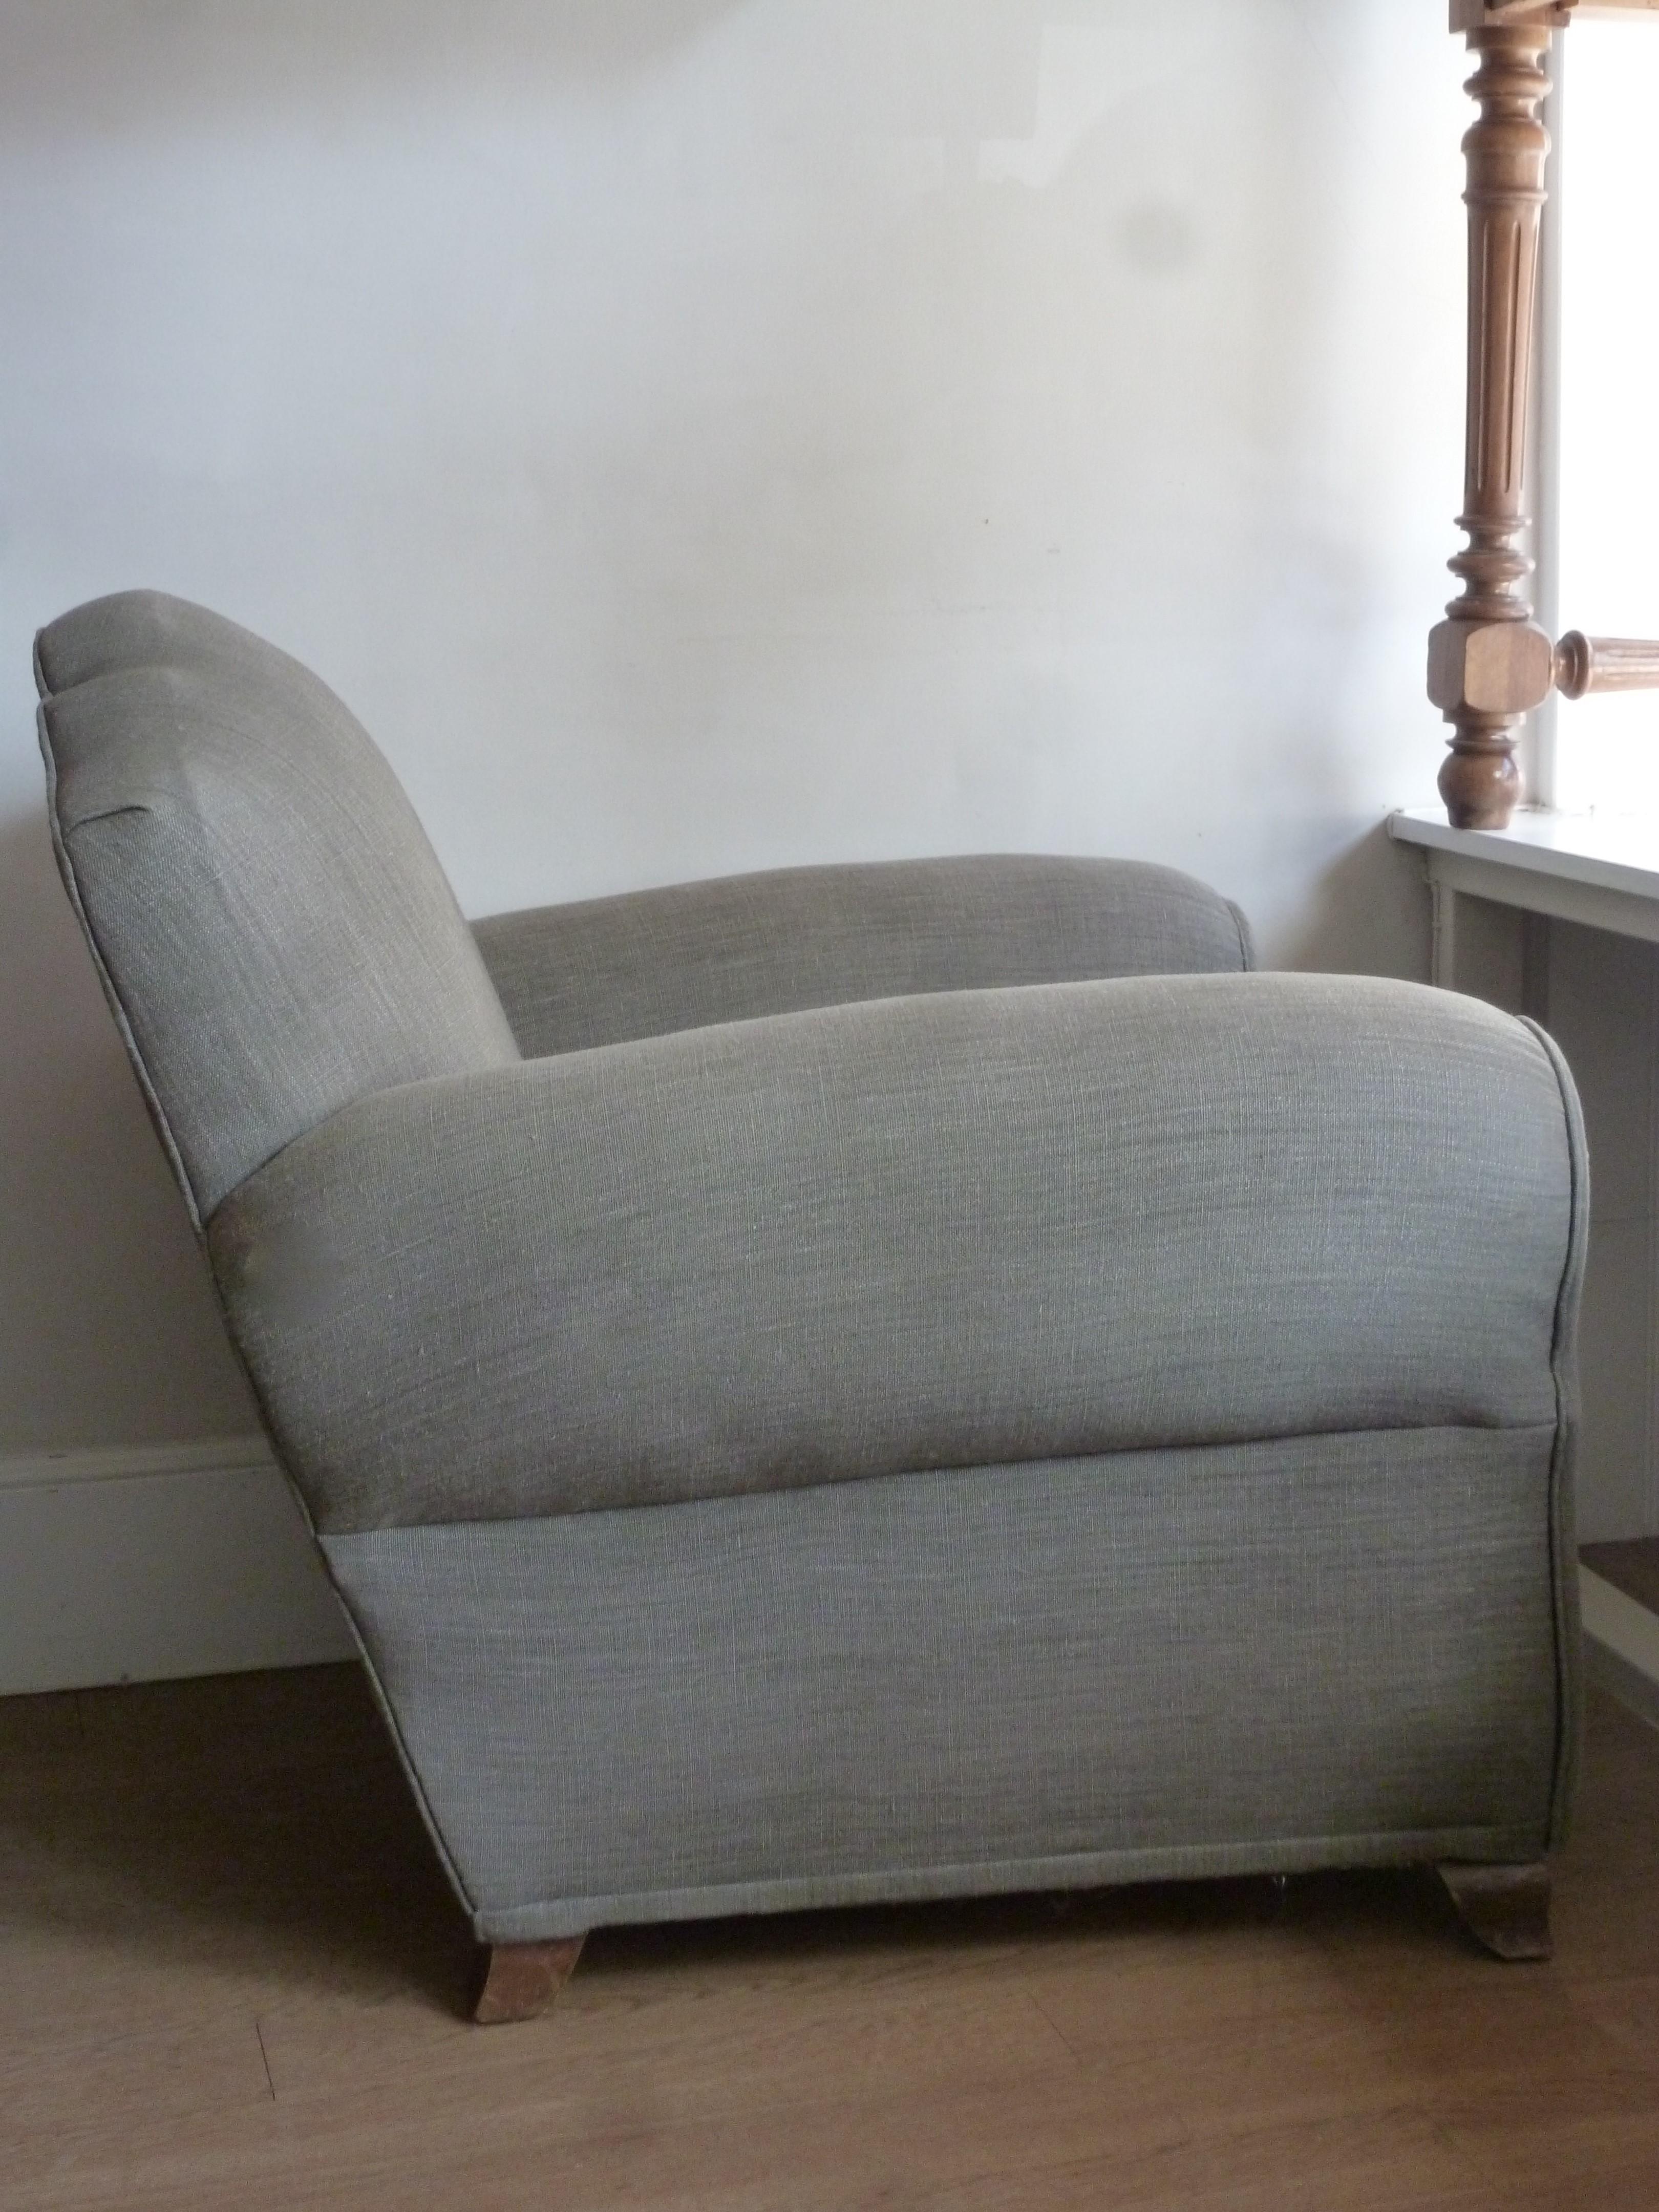 Iconic 1940 French Art Deco Club Chair Armchair Re-Upholstered Grey French Linen For Sale 5